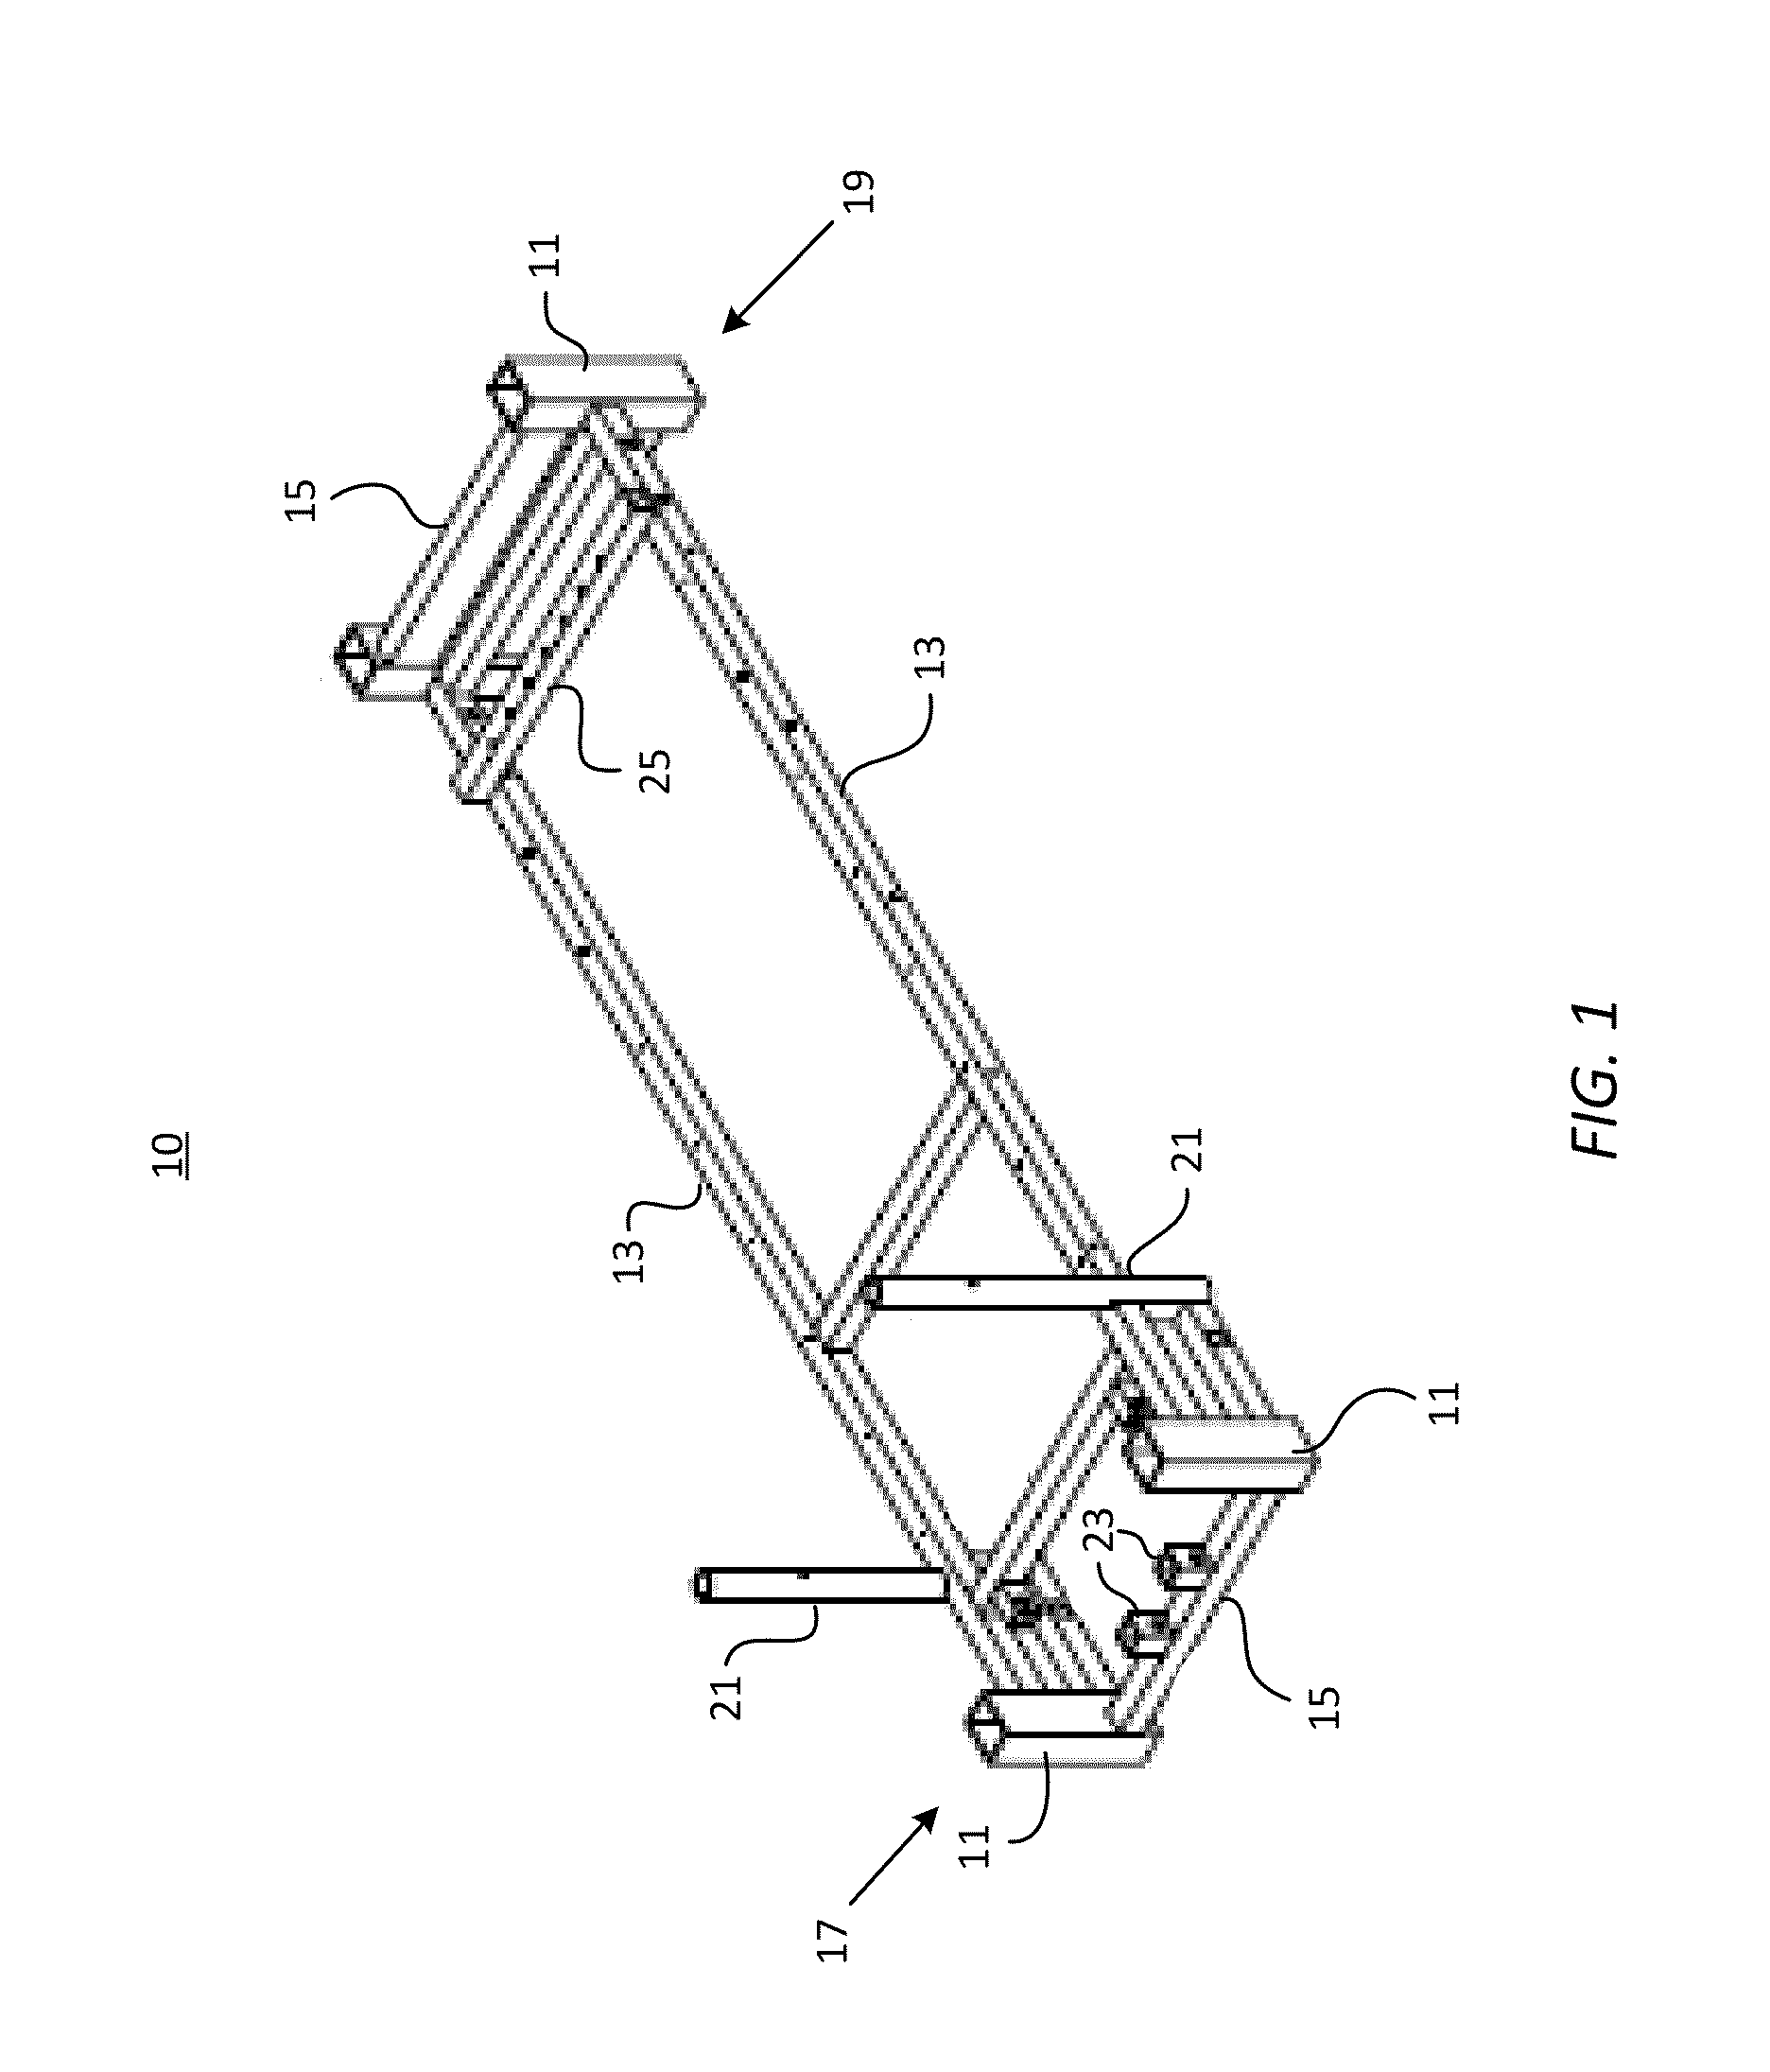 Reformer apparatus having integral ergonomic purchase translatable into deployed and stowed positions